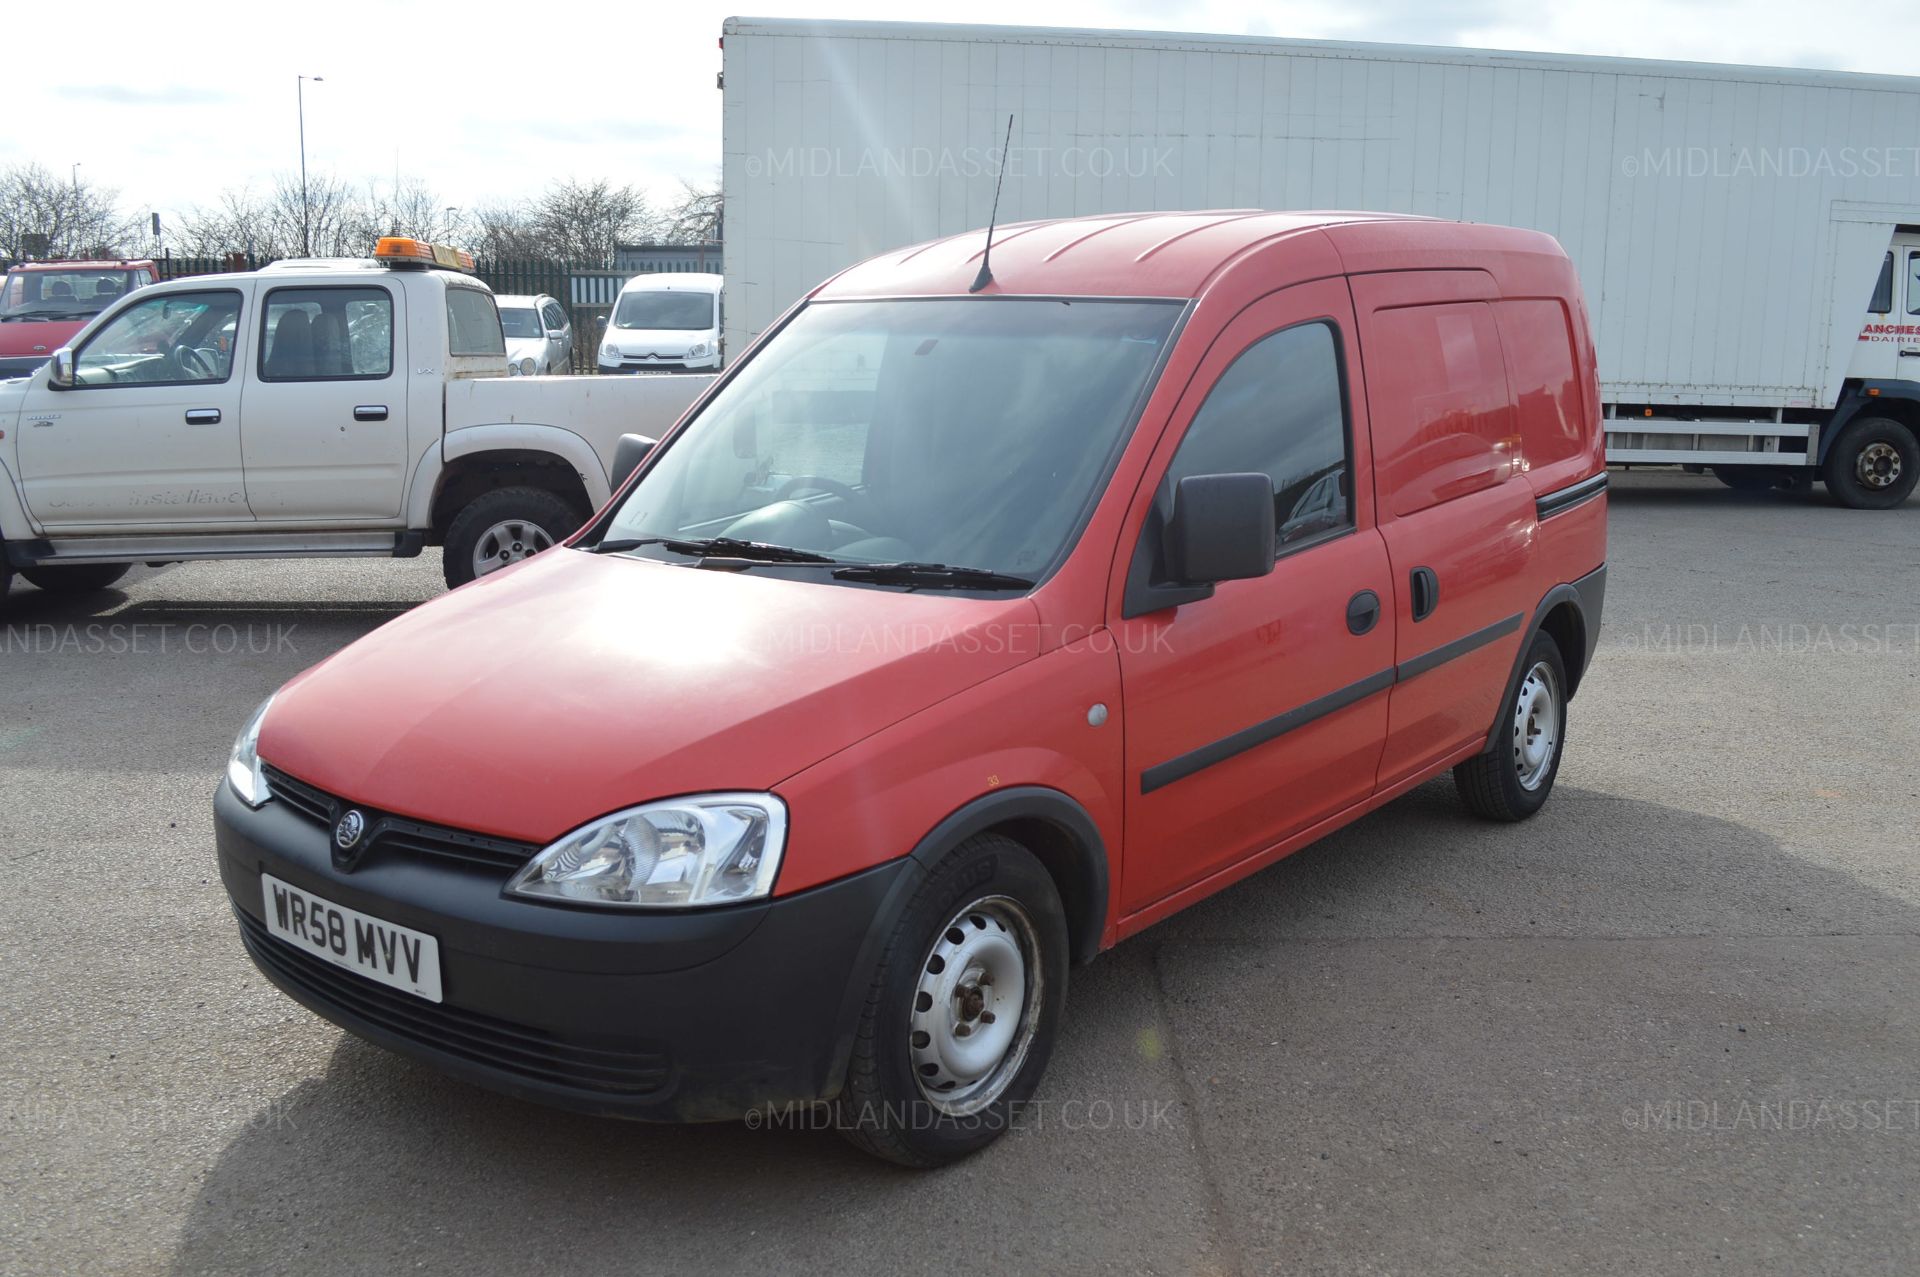 KB - 2008/58 REG VAUXHALL COMBO 1700 CDTI - 1 PREVIOUS OWNER, ROYAL MAIL *NO VAT*   DATE OF - Image 3 of 19